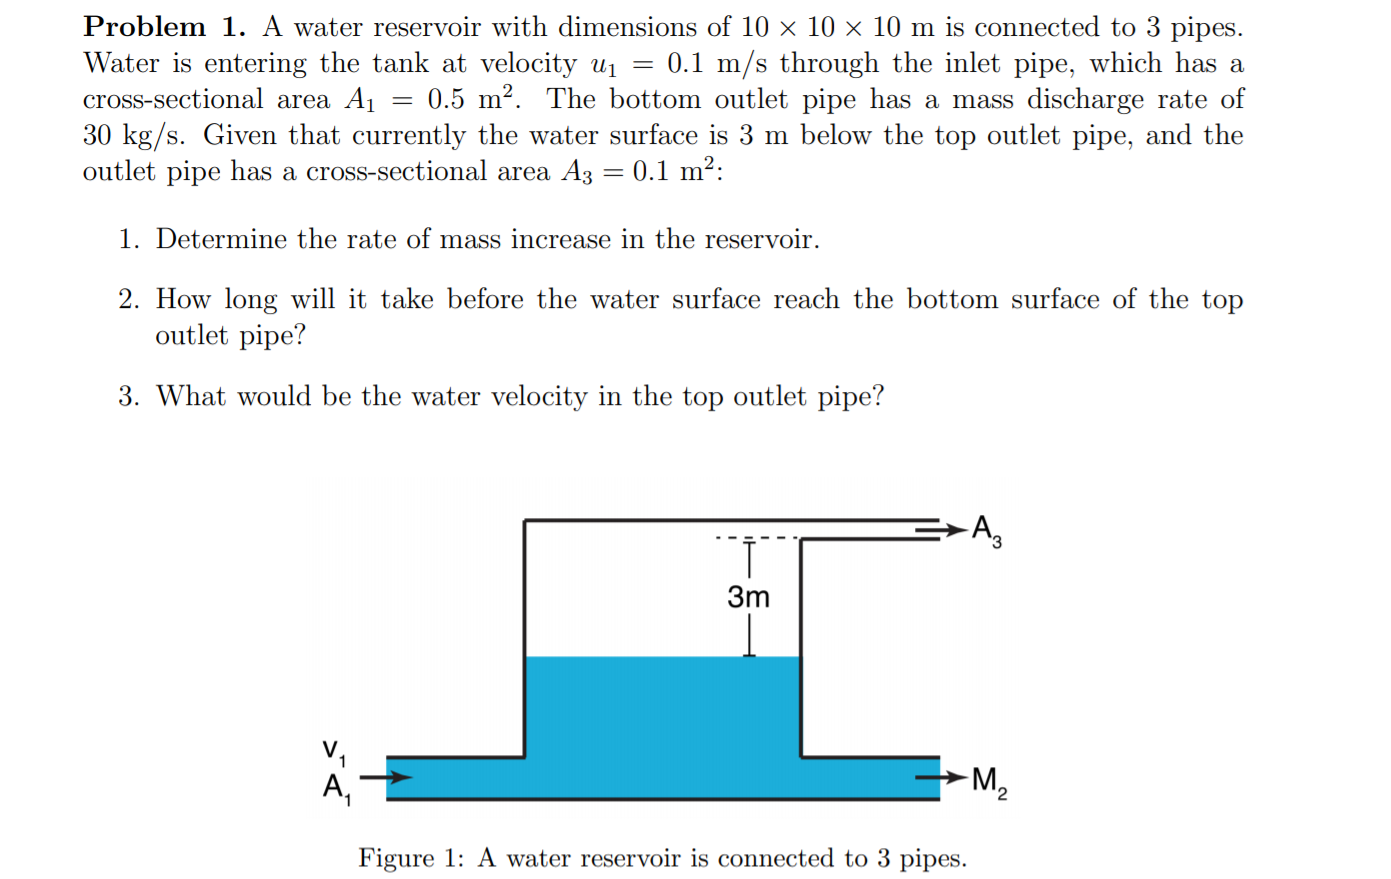 Problem 1. A water reservoir with dimensions of 10 x 10 × 10 m is connected to 3 pipes.
Water is entering the tank at velocity u1 = 0.1 m/s through the inlet pipe, which has a
cross-sectional area A1
0.5 m?. The bottom outlet pipe has a mass discharge rate of
30 kg/s. Given that currently the water surface is 3 m below the top outlet pipe, and the
outlet pipe has a cross-sectional area A3
0.1 m²:
1. Determine the rate of mass increase in the reservoir.
2. How long will it take before the water surface reach the bottom surface of the top
outlet pipe?
3. What would be the water velocity in the top outlet pipe?
-A,
3m
V,
A,
-M2
Figure 1: A water reservoir is connected to 3 pipes.
